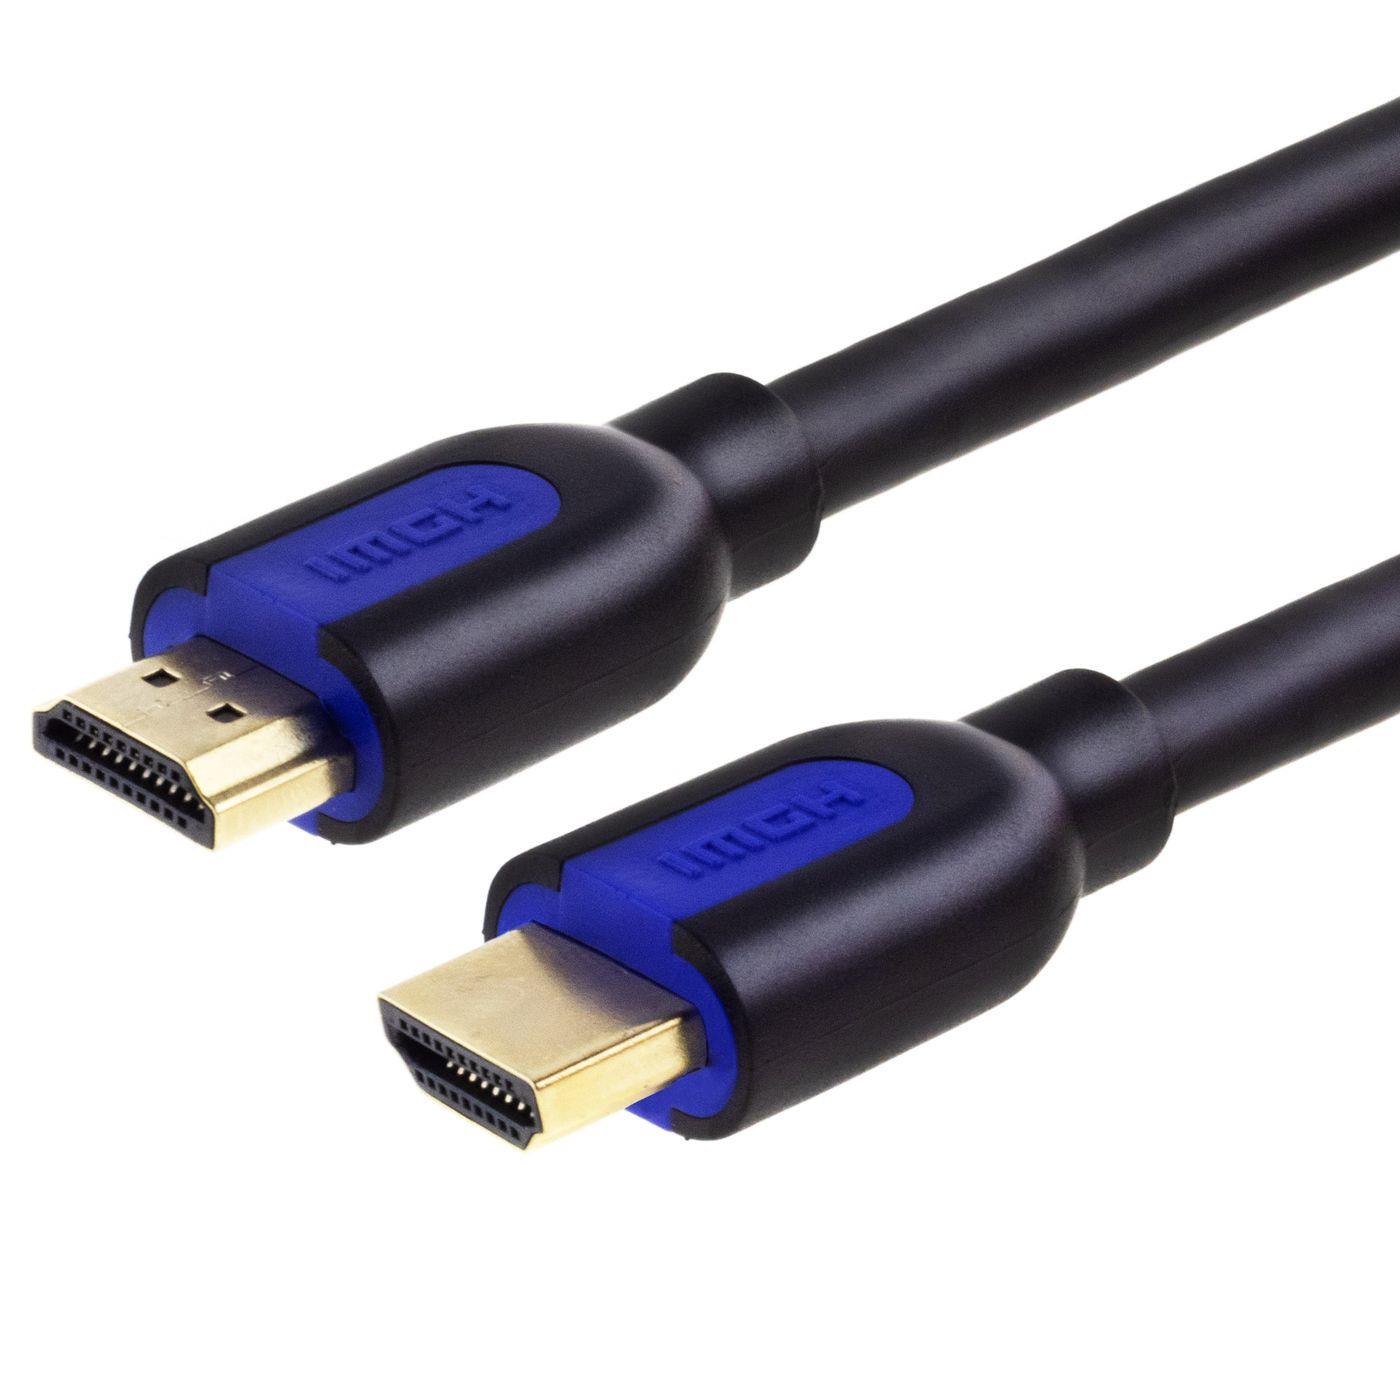 2m HDMI Cable HDMI 2.1 Cable 8k @ 60Hz - 4k @ 120Hz 48GBit/s High Speed UHD